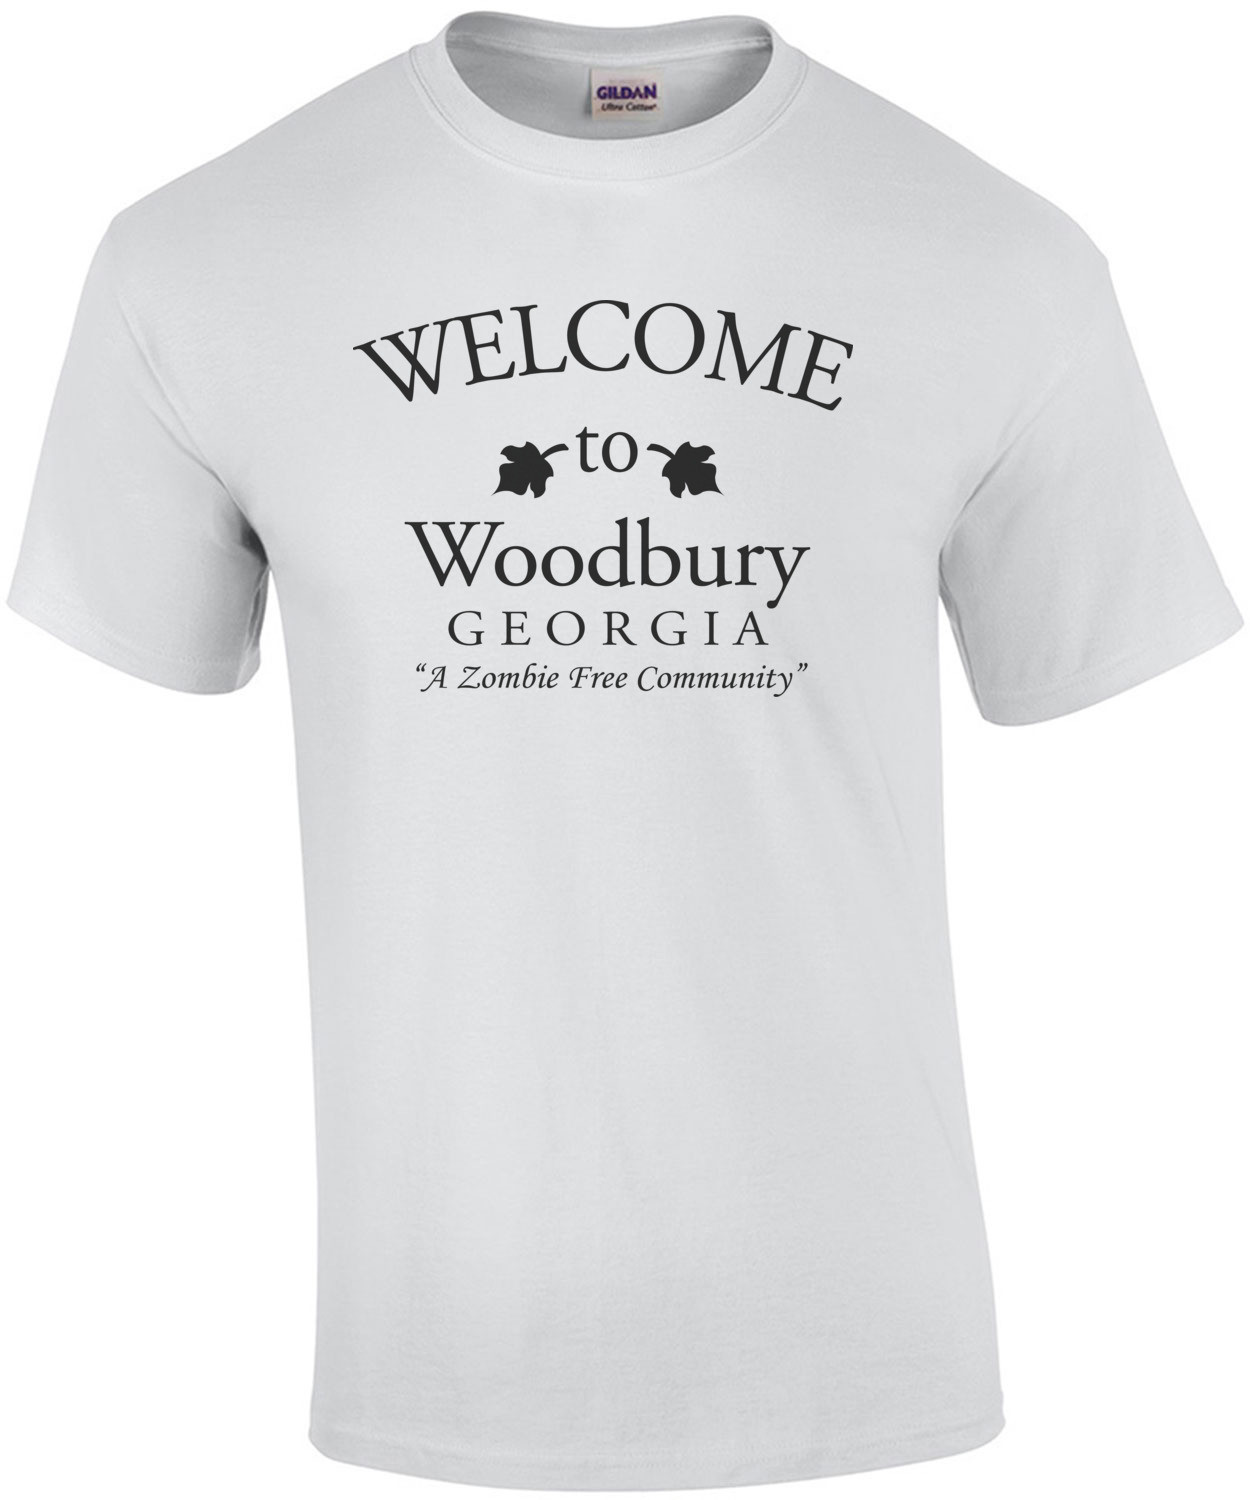 Welcome to Woodbury Georgia - a zombie free community - walking dead t-shirt